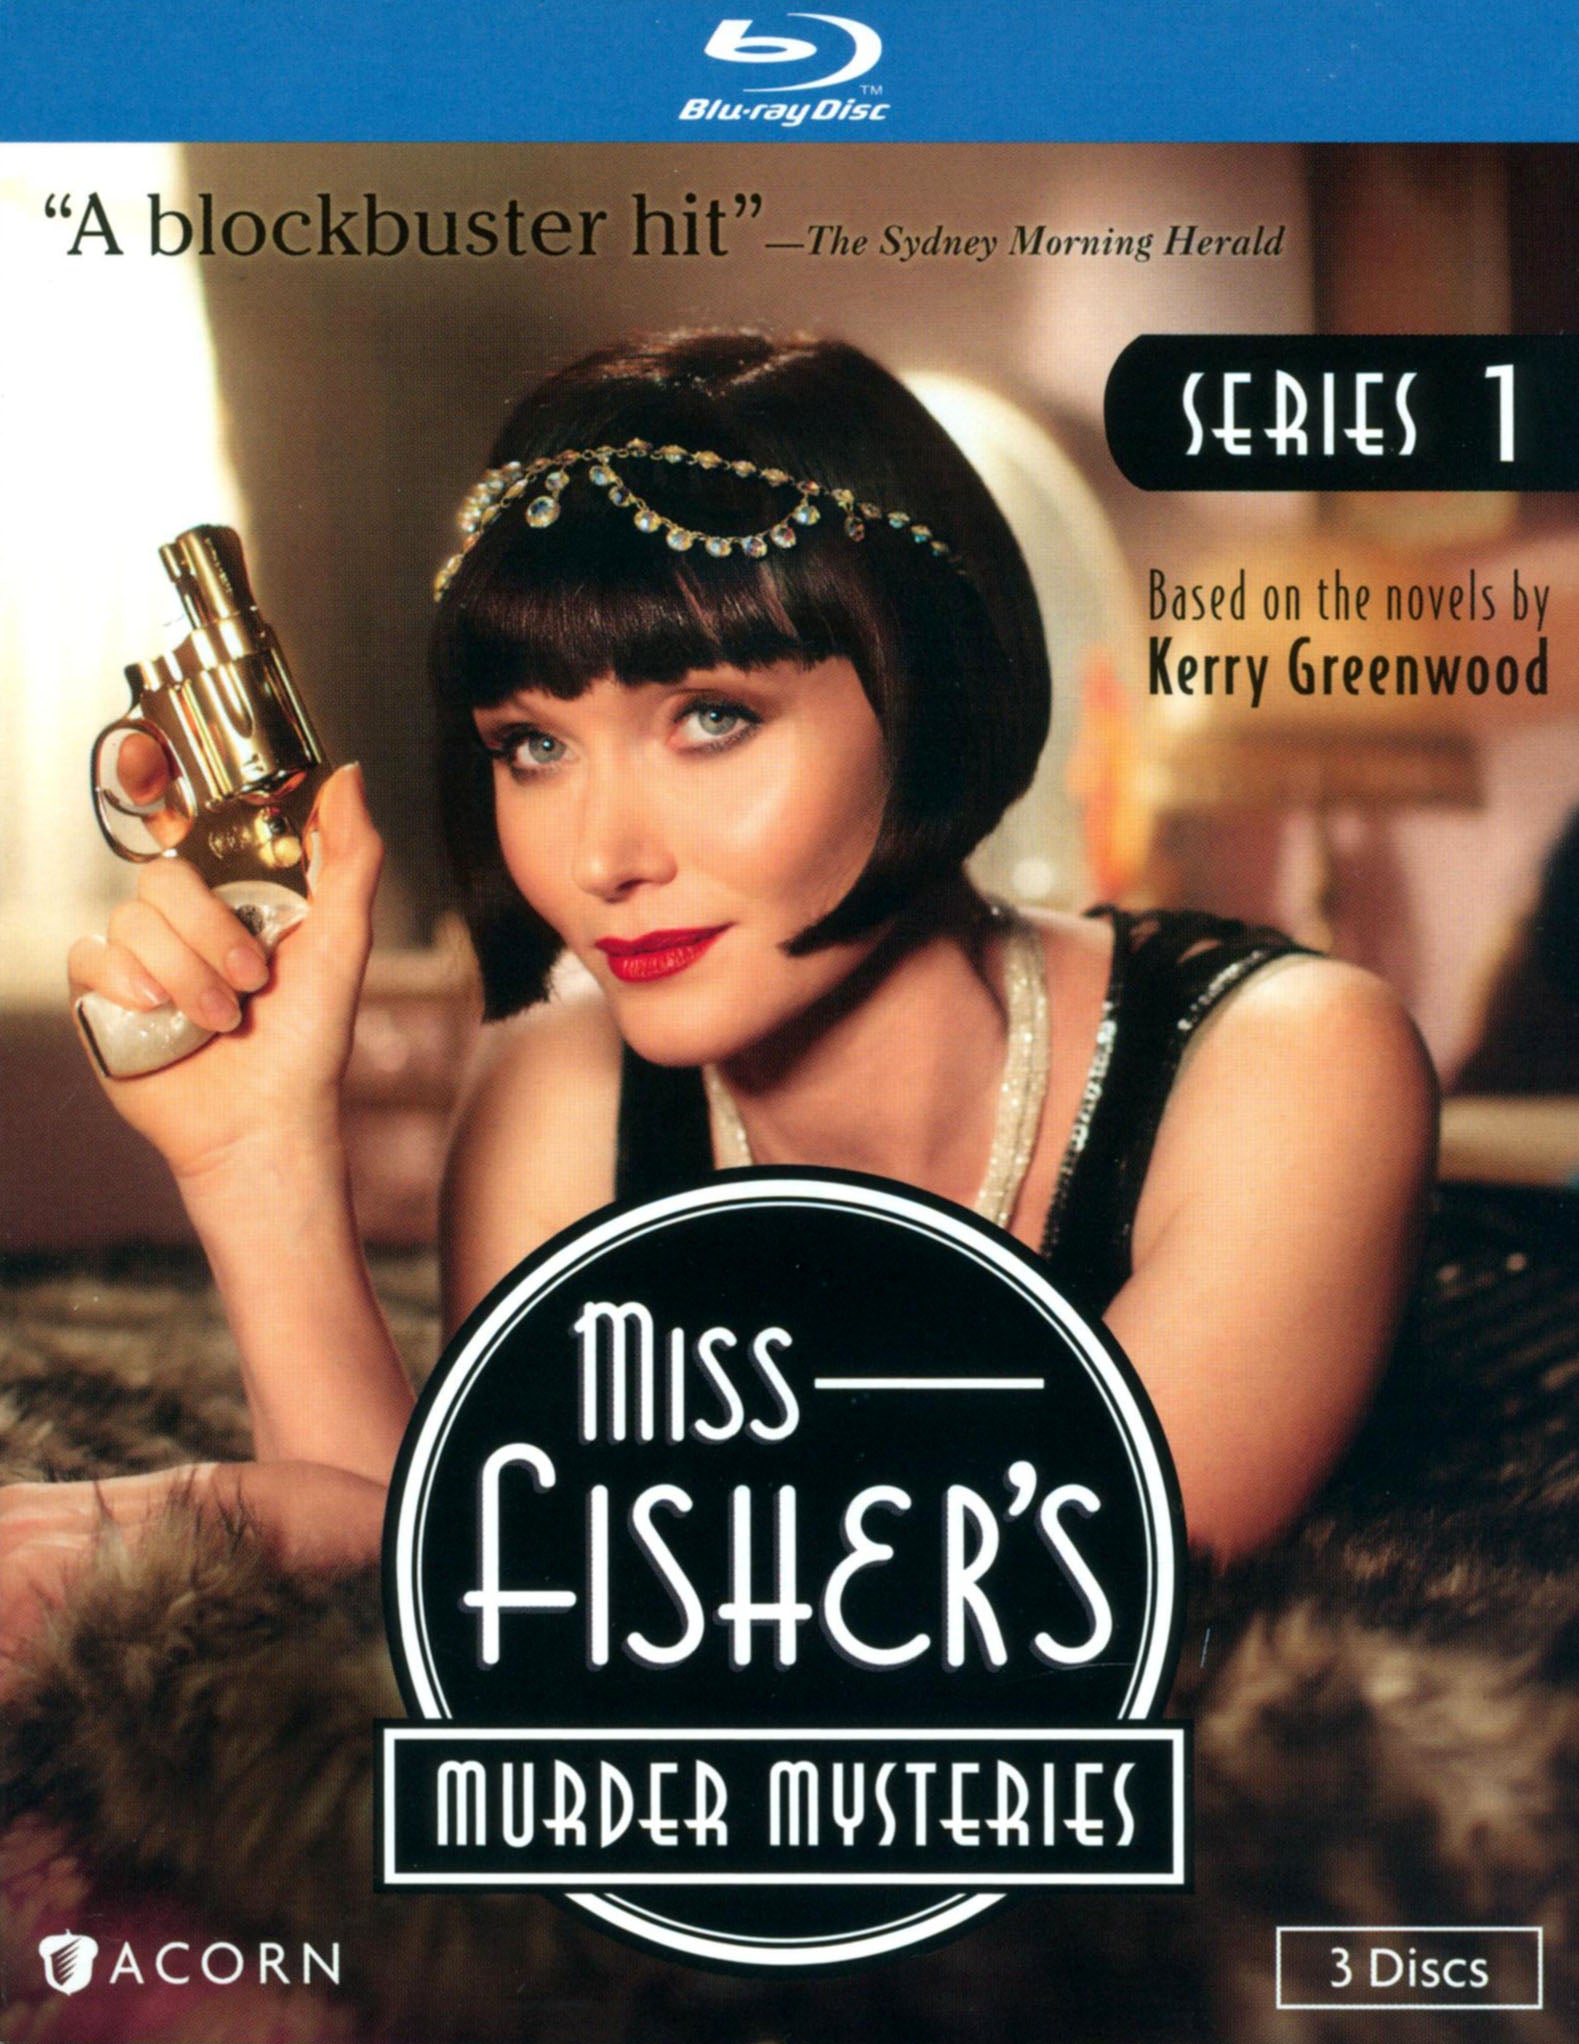 Miss Fisher's Murder Mysteries: Series 1 [3 Discs] [Blu-ray] cover art